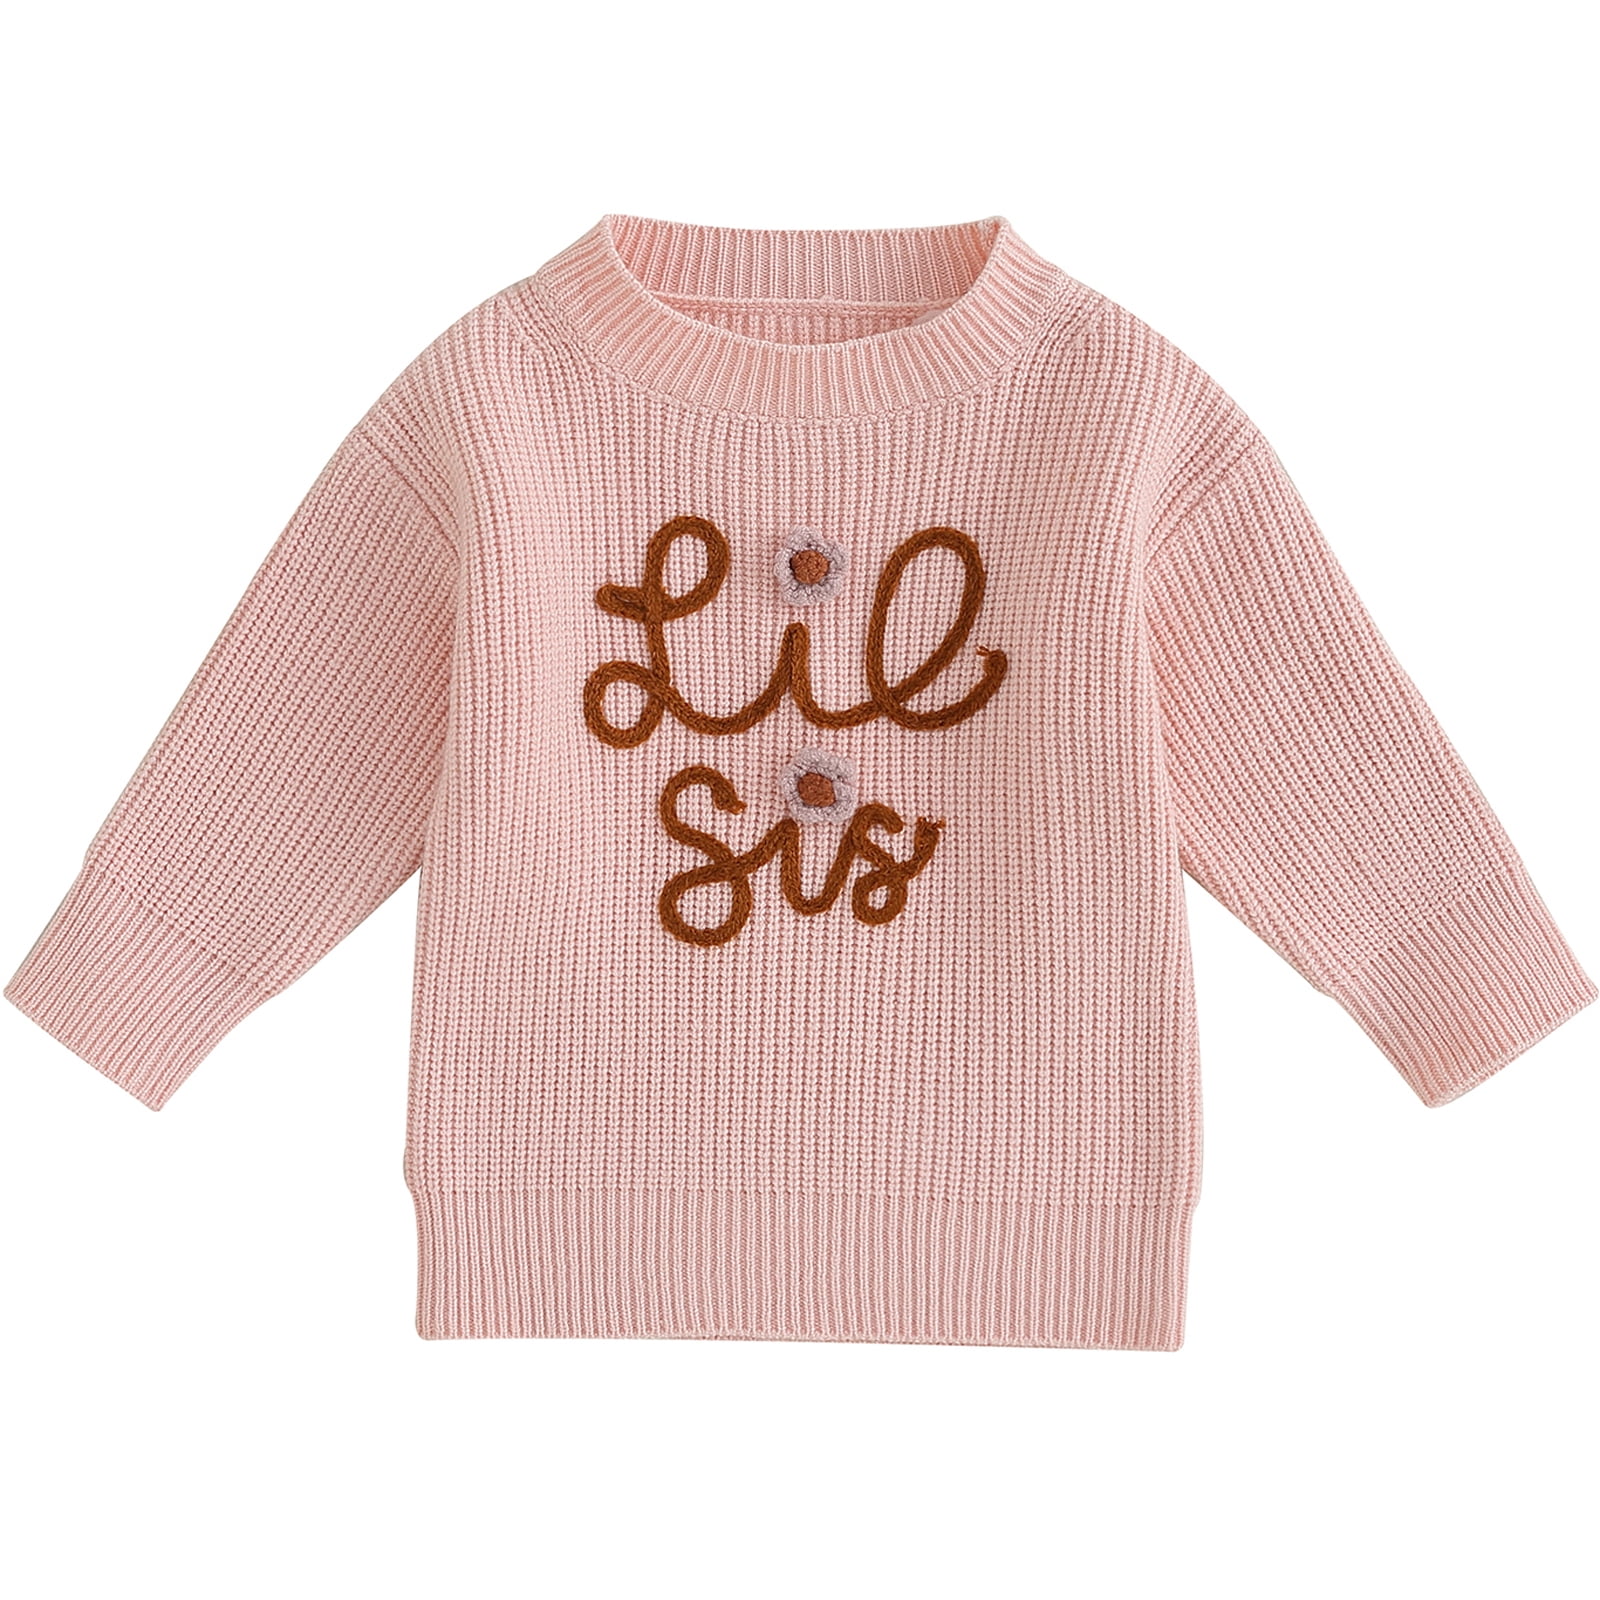 Big Sister Little Sister Matching Outfits Toddler Baby Girl Chunky Knit ...